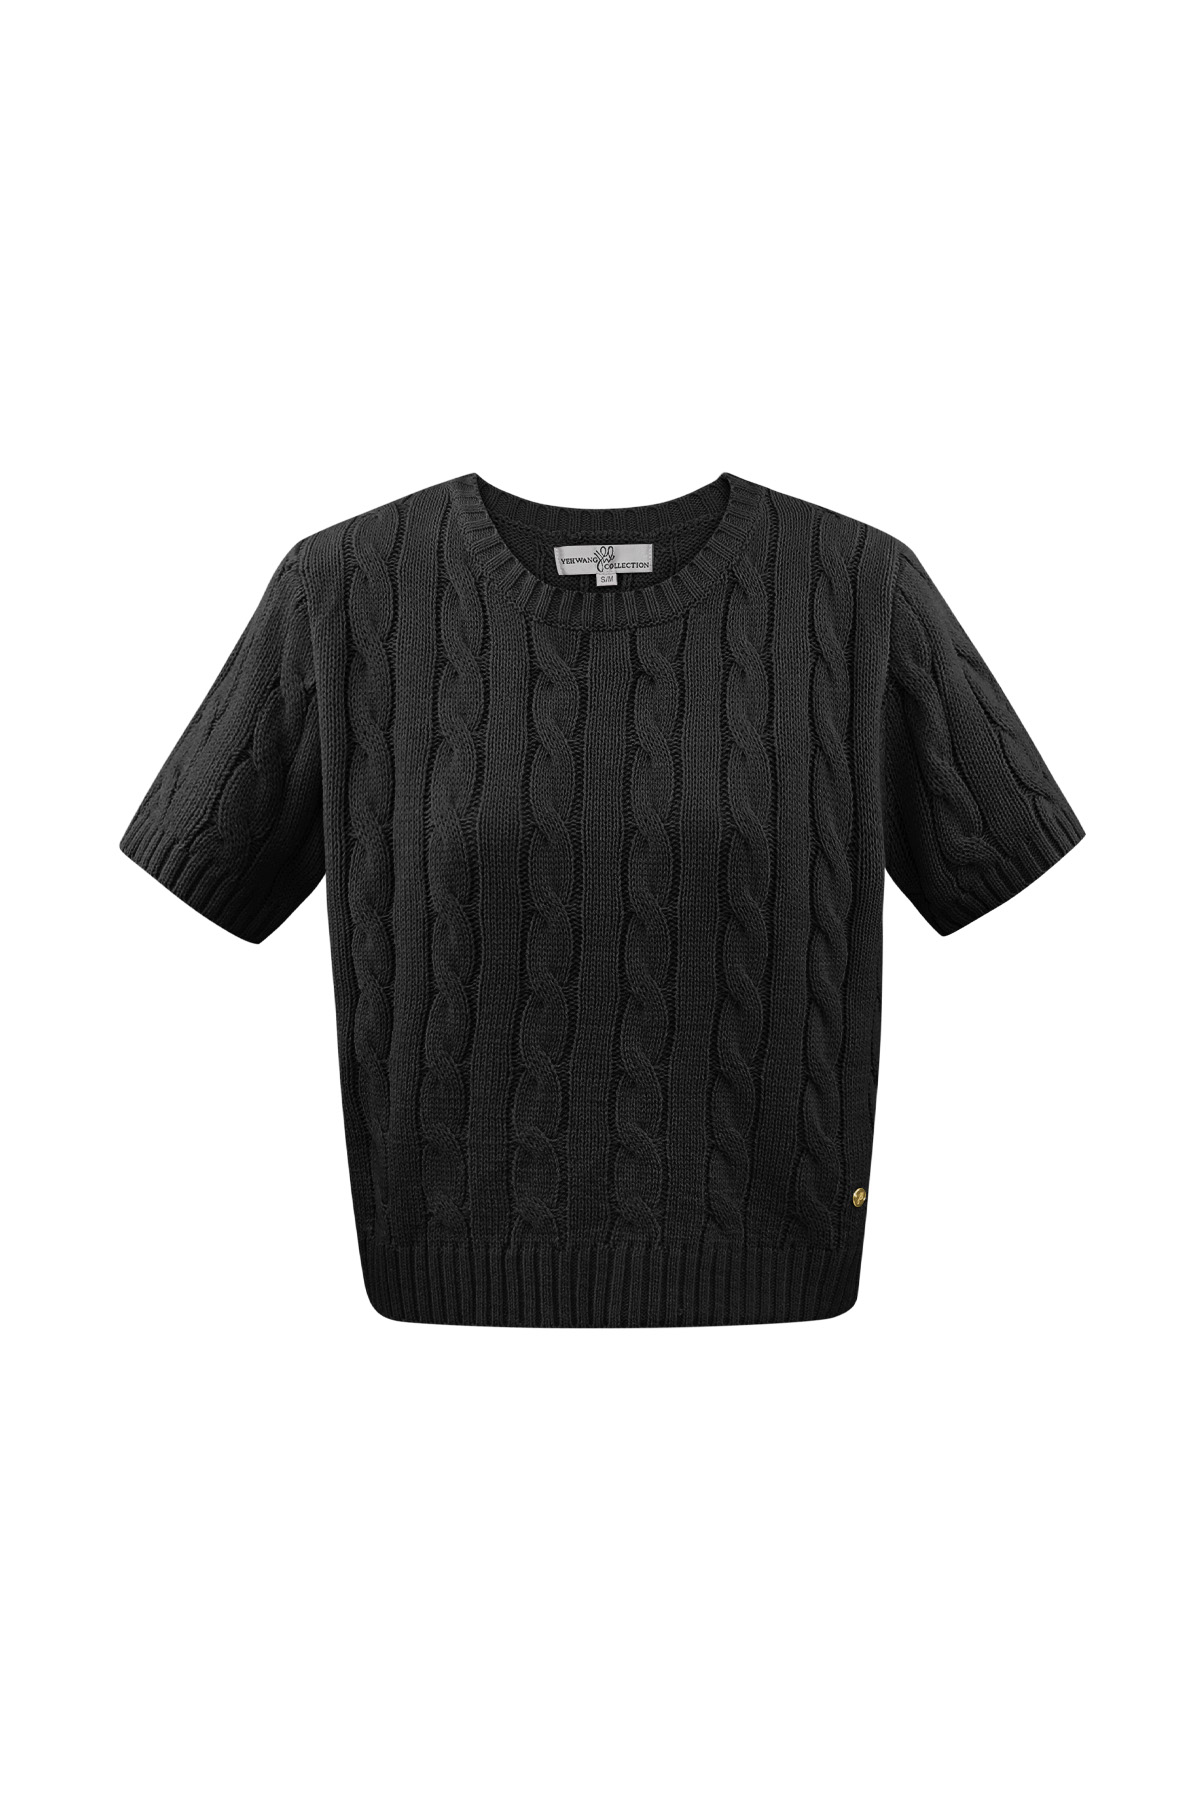 Classic cable knitted sweater with short sleeves small/medium – black 